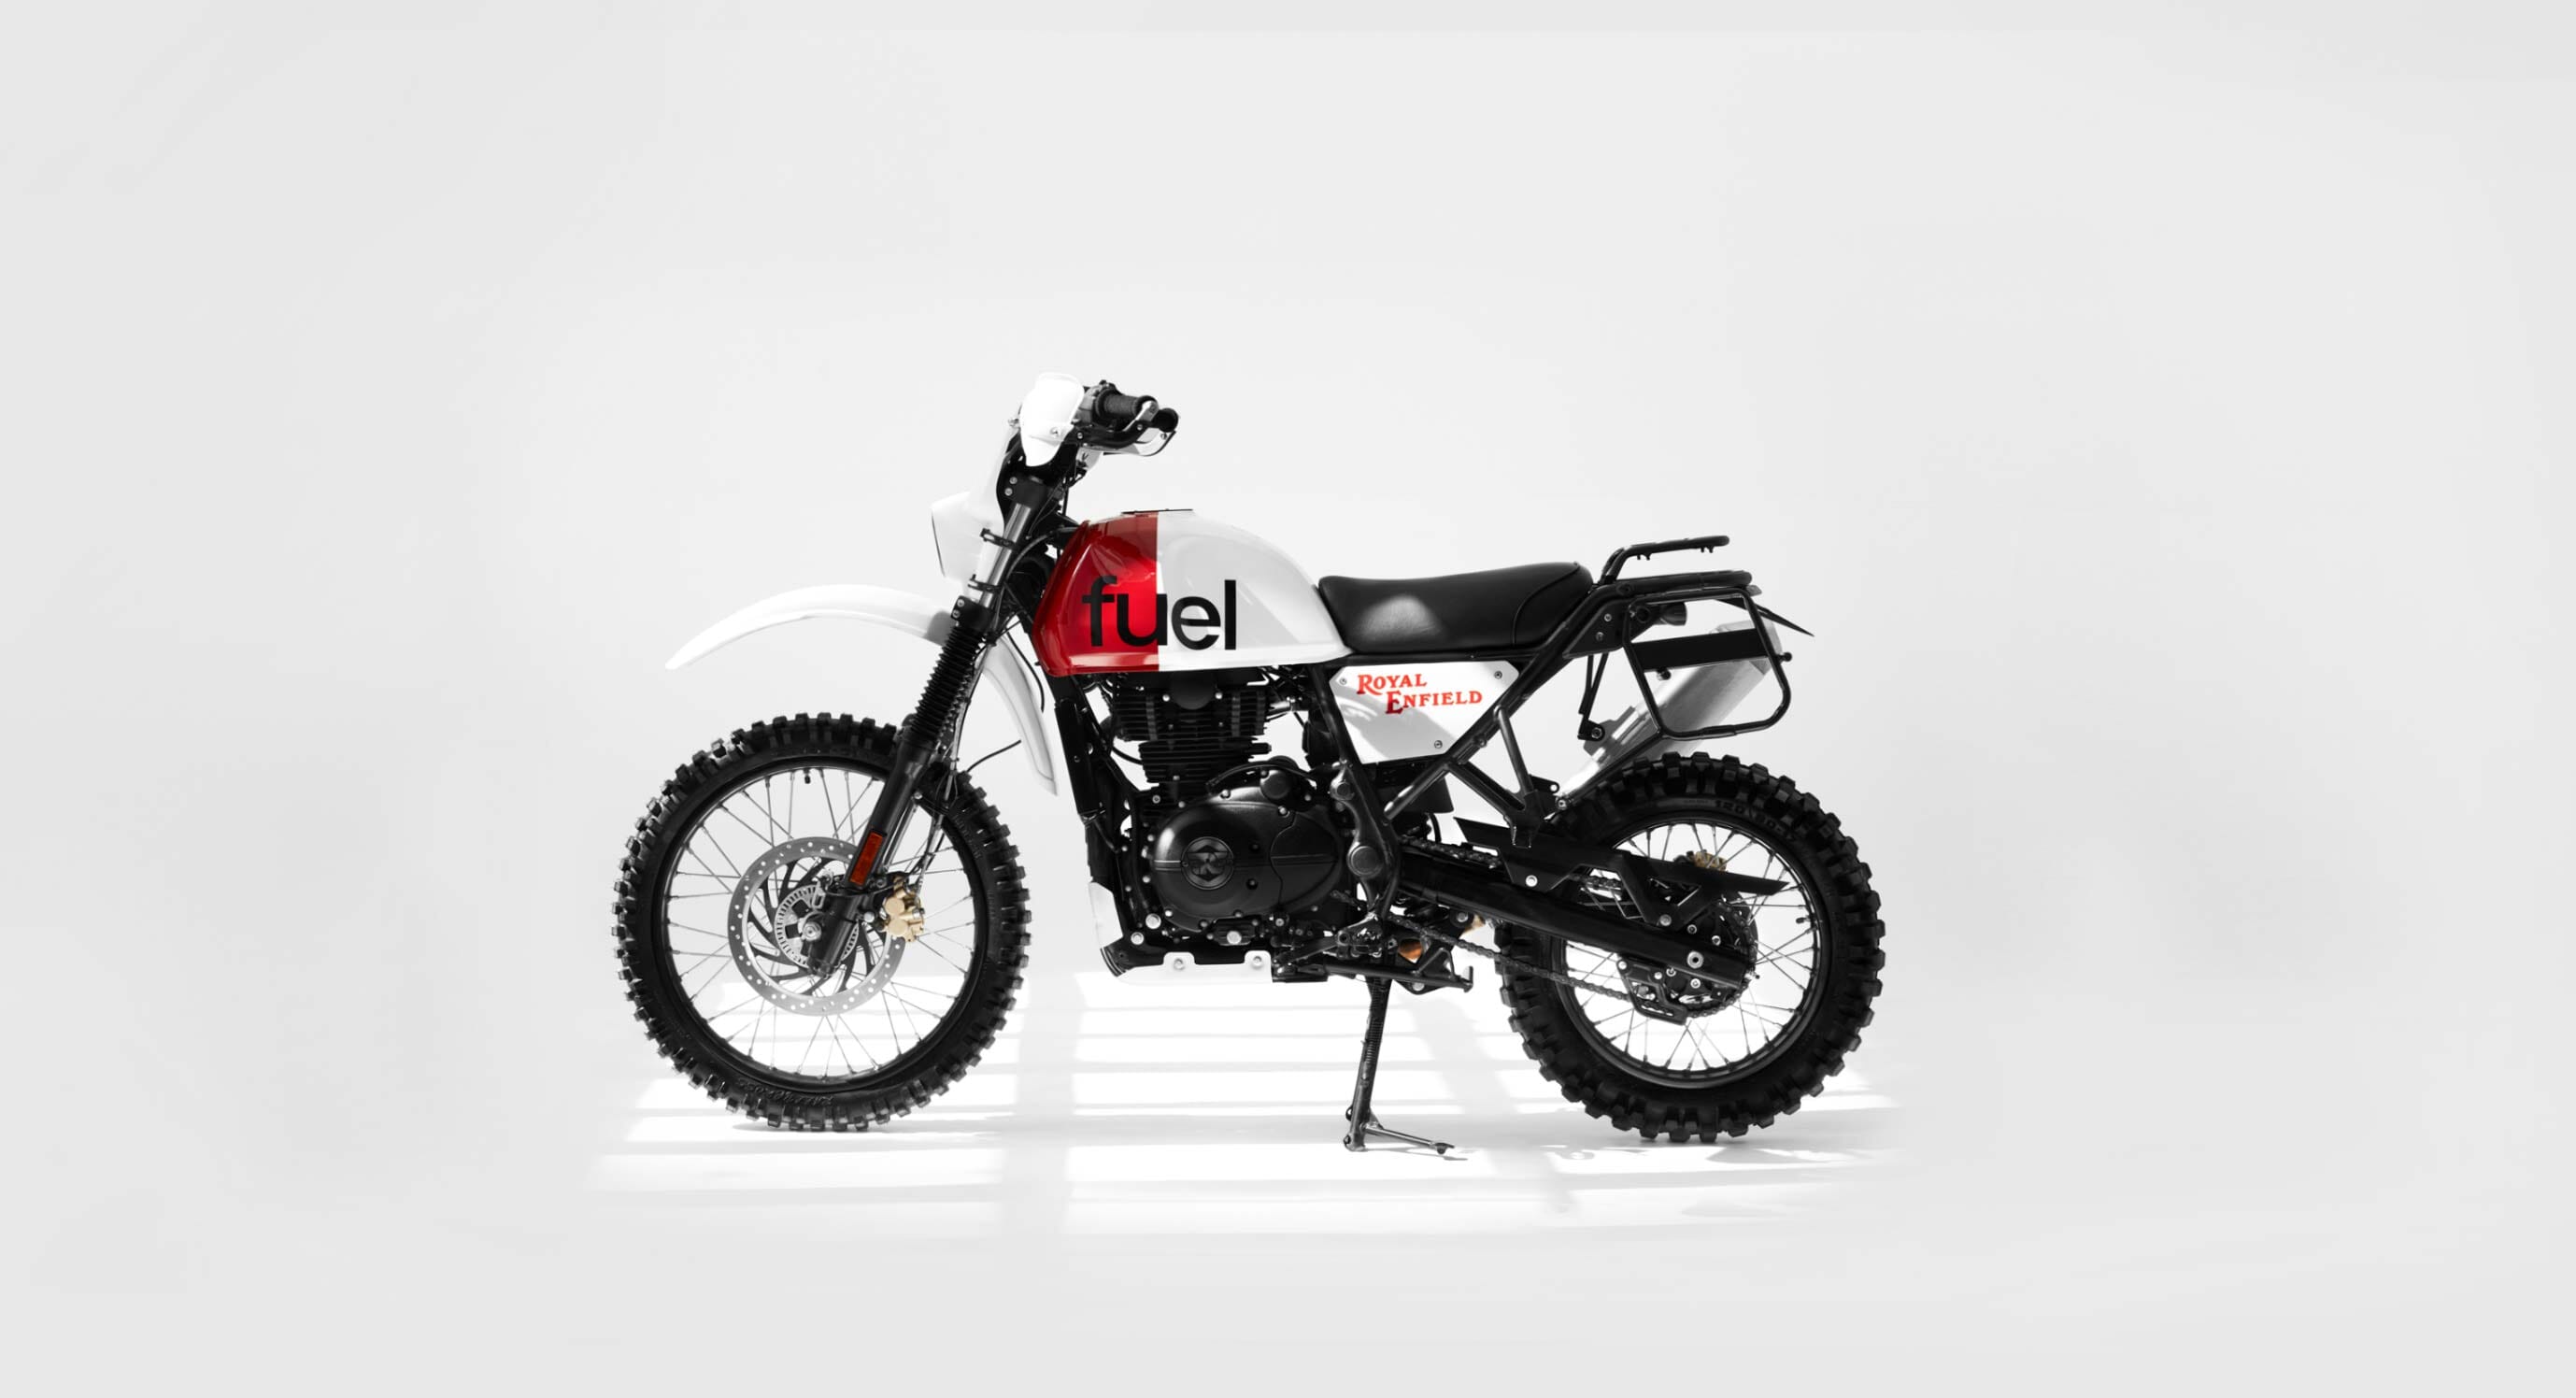 Meet The Dakar-Inspired Royal Enfield From Fuel Motorcycles